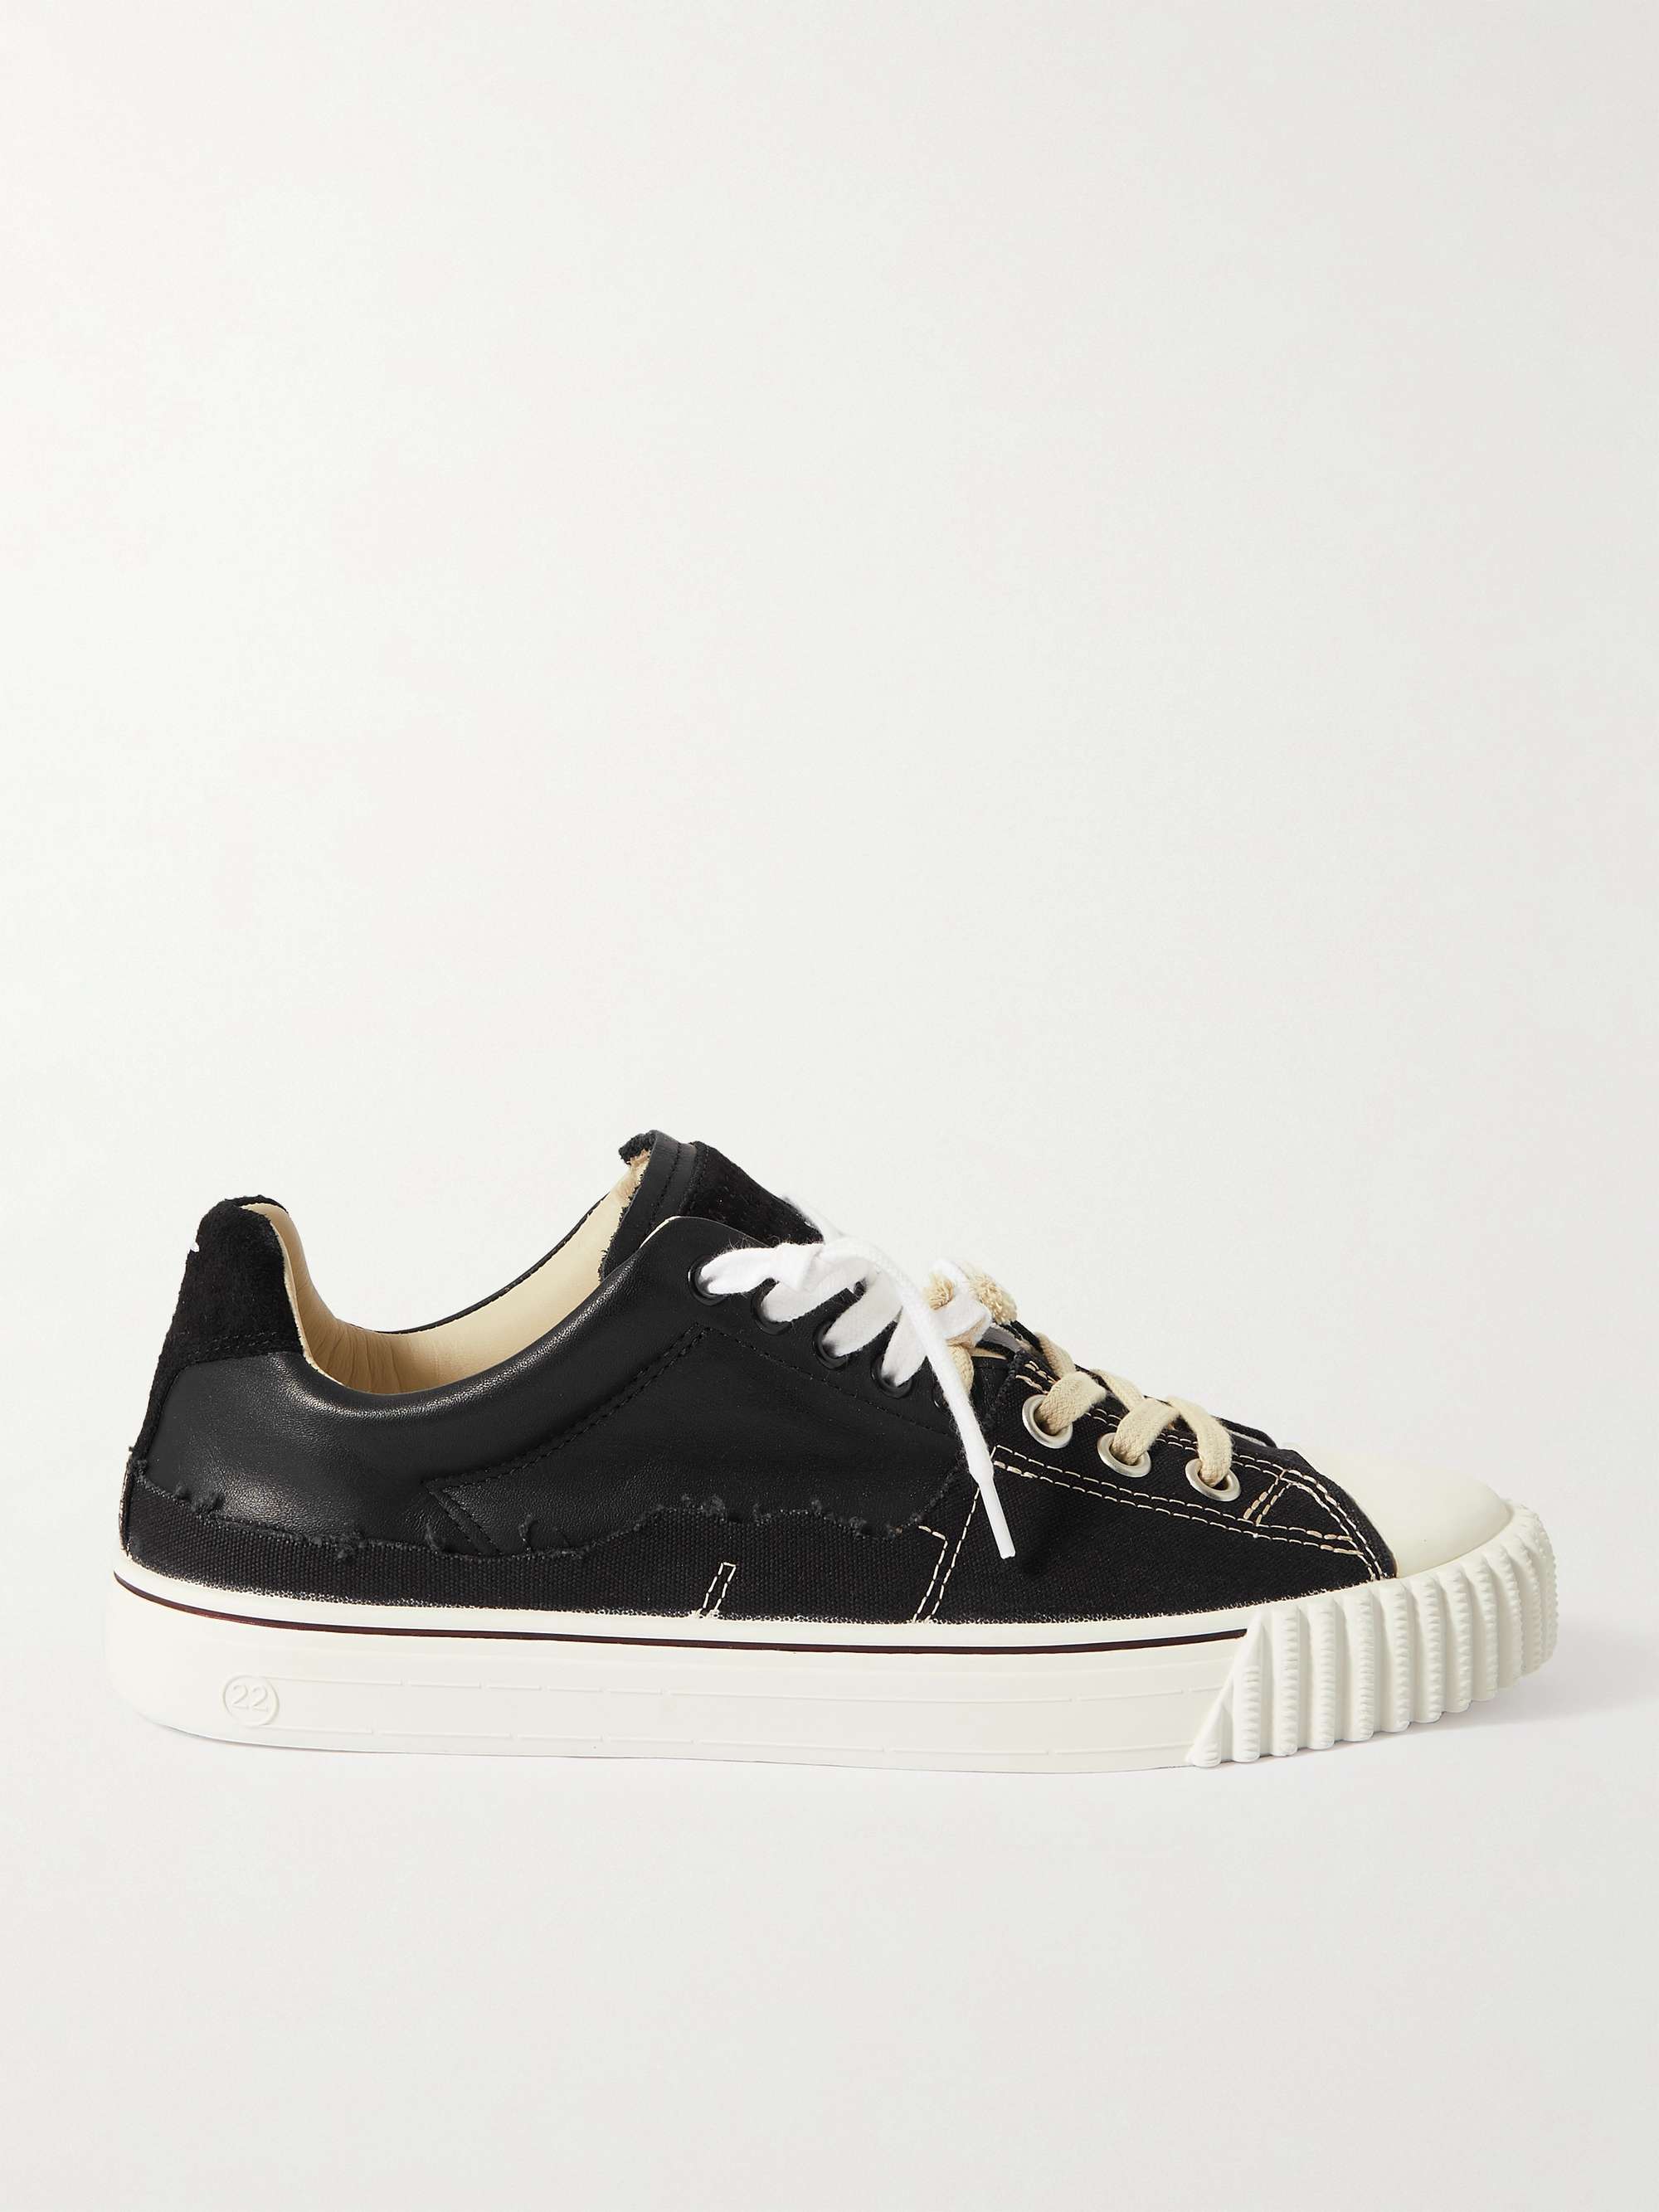 MAISON MARGIELA Evolution Distressed Canvas and Leather Sneakers for Men |  MR PORTER